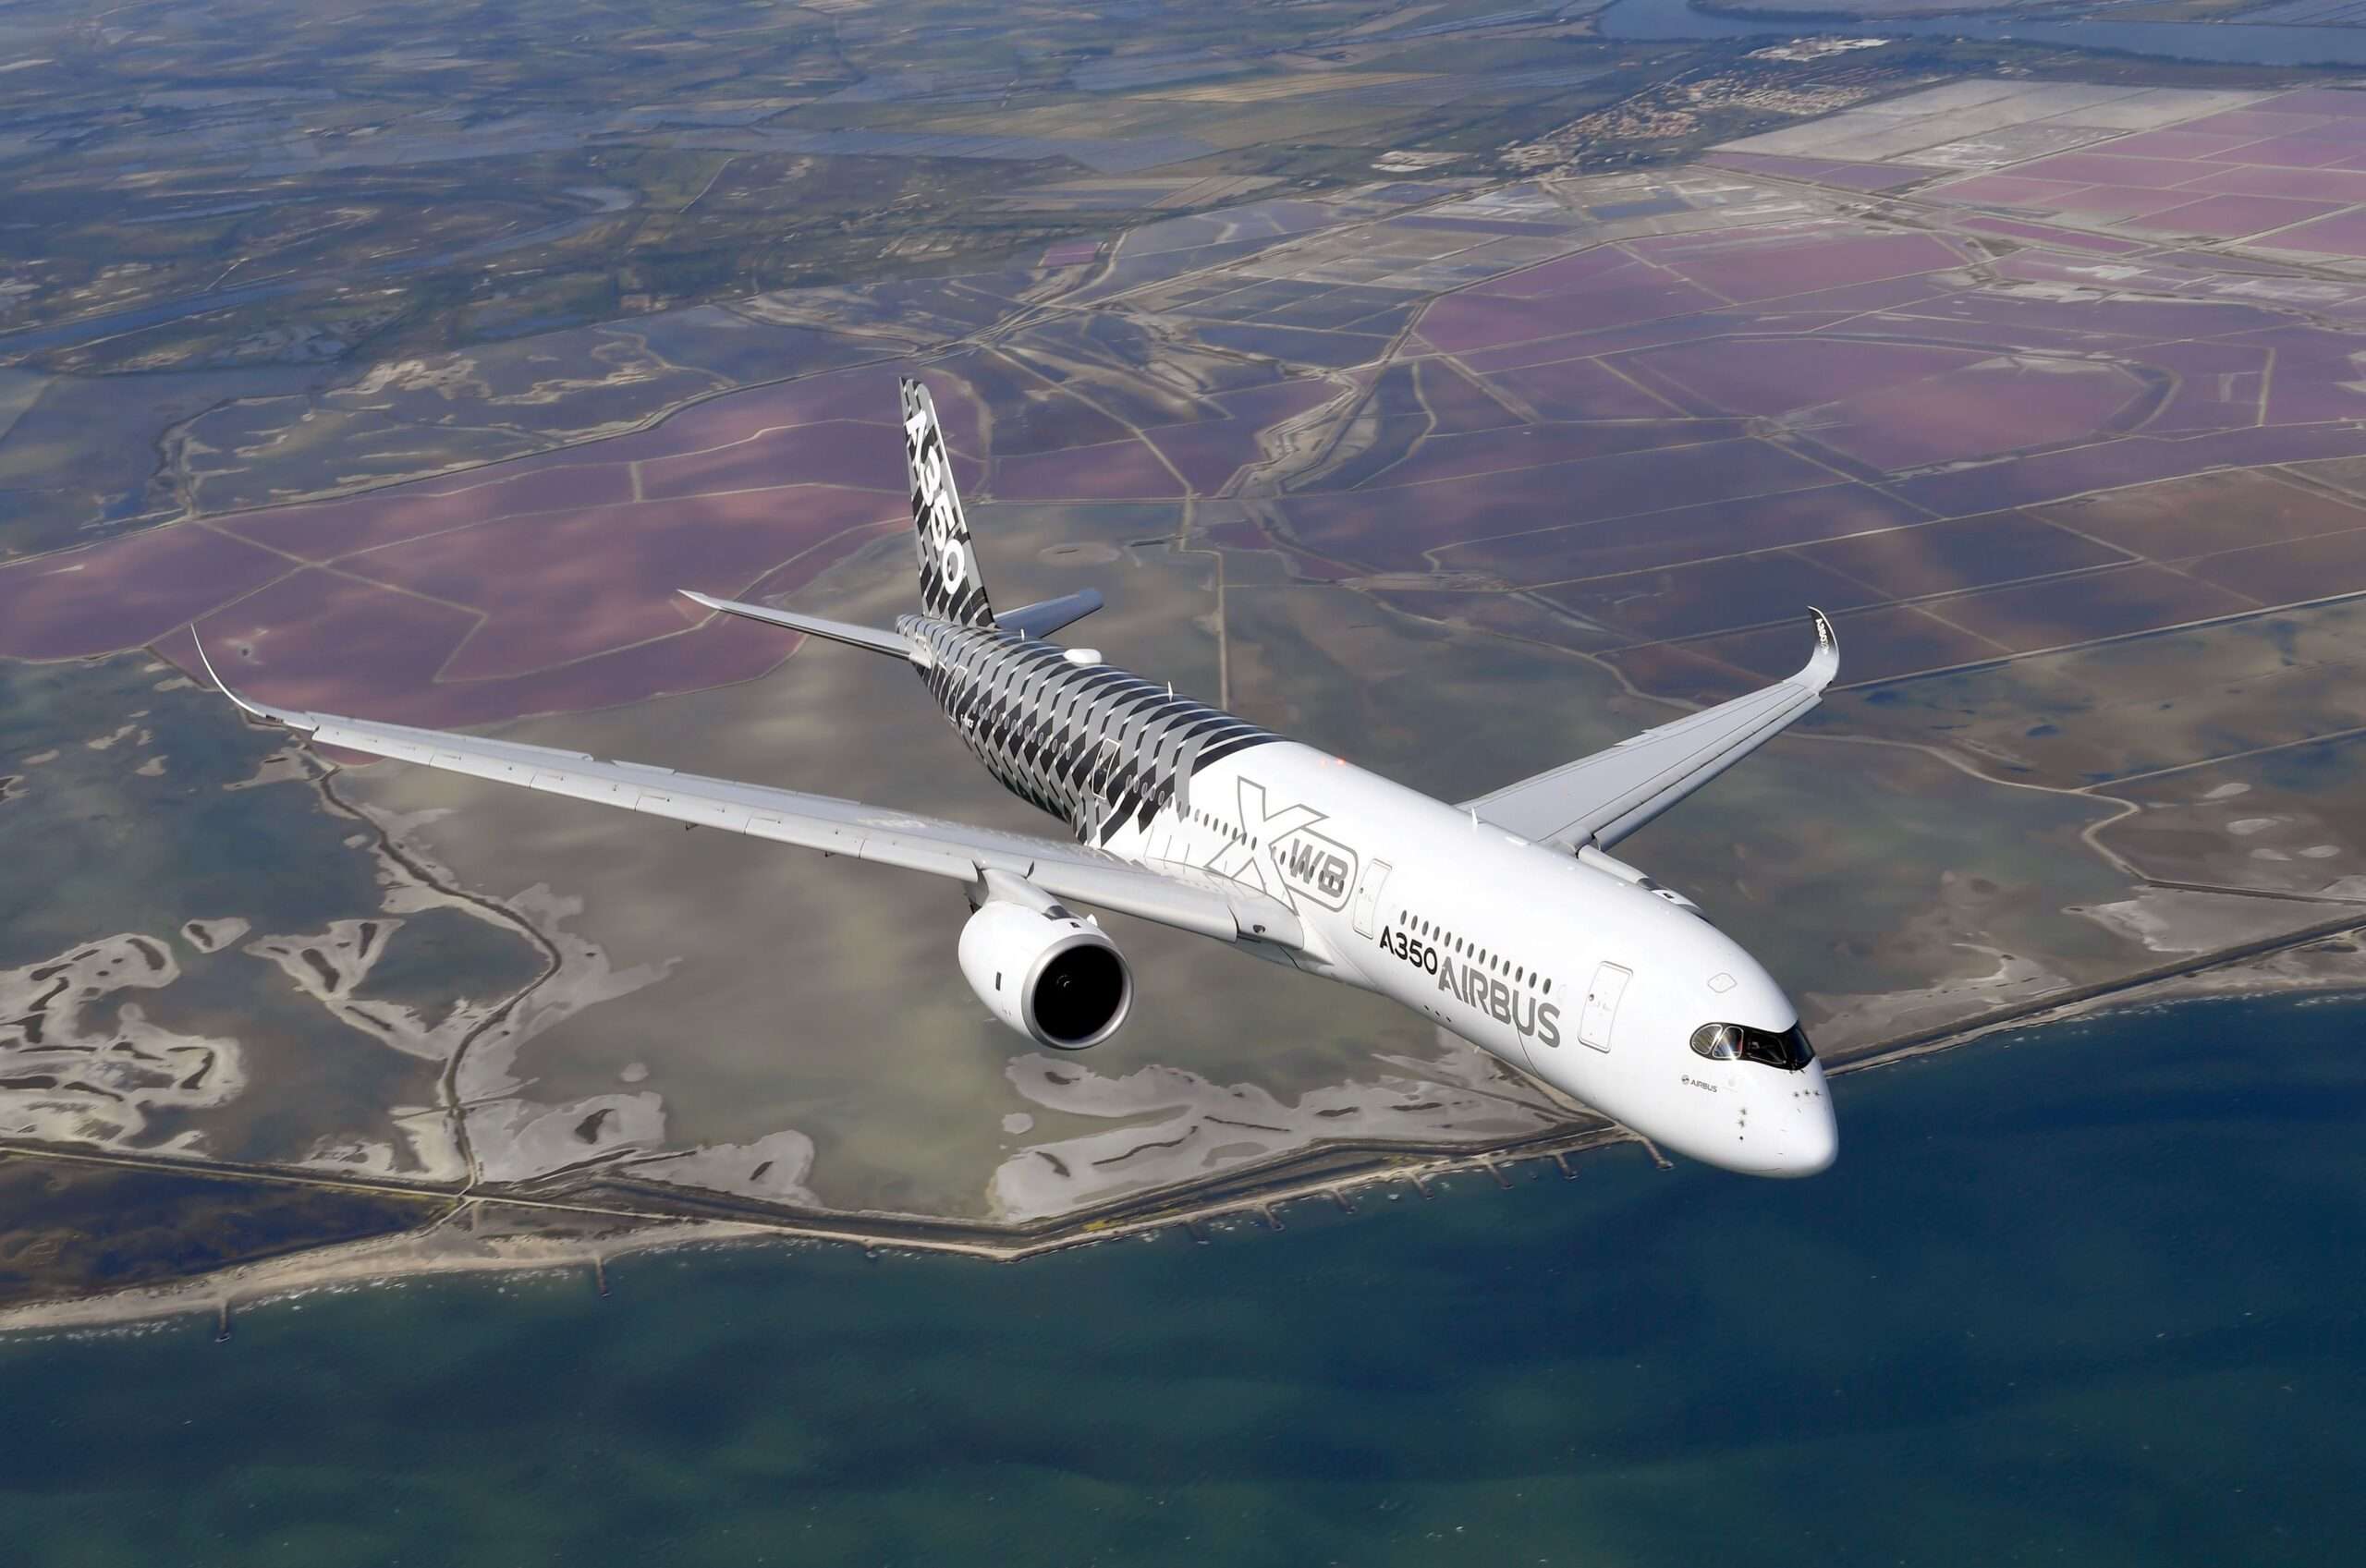 Paris Air Show: "Business Is Back", Says Airbus Sales Chief